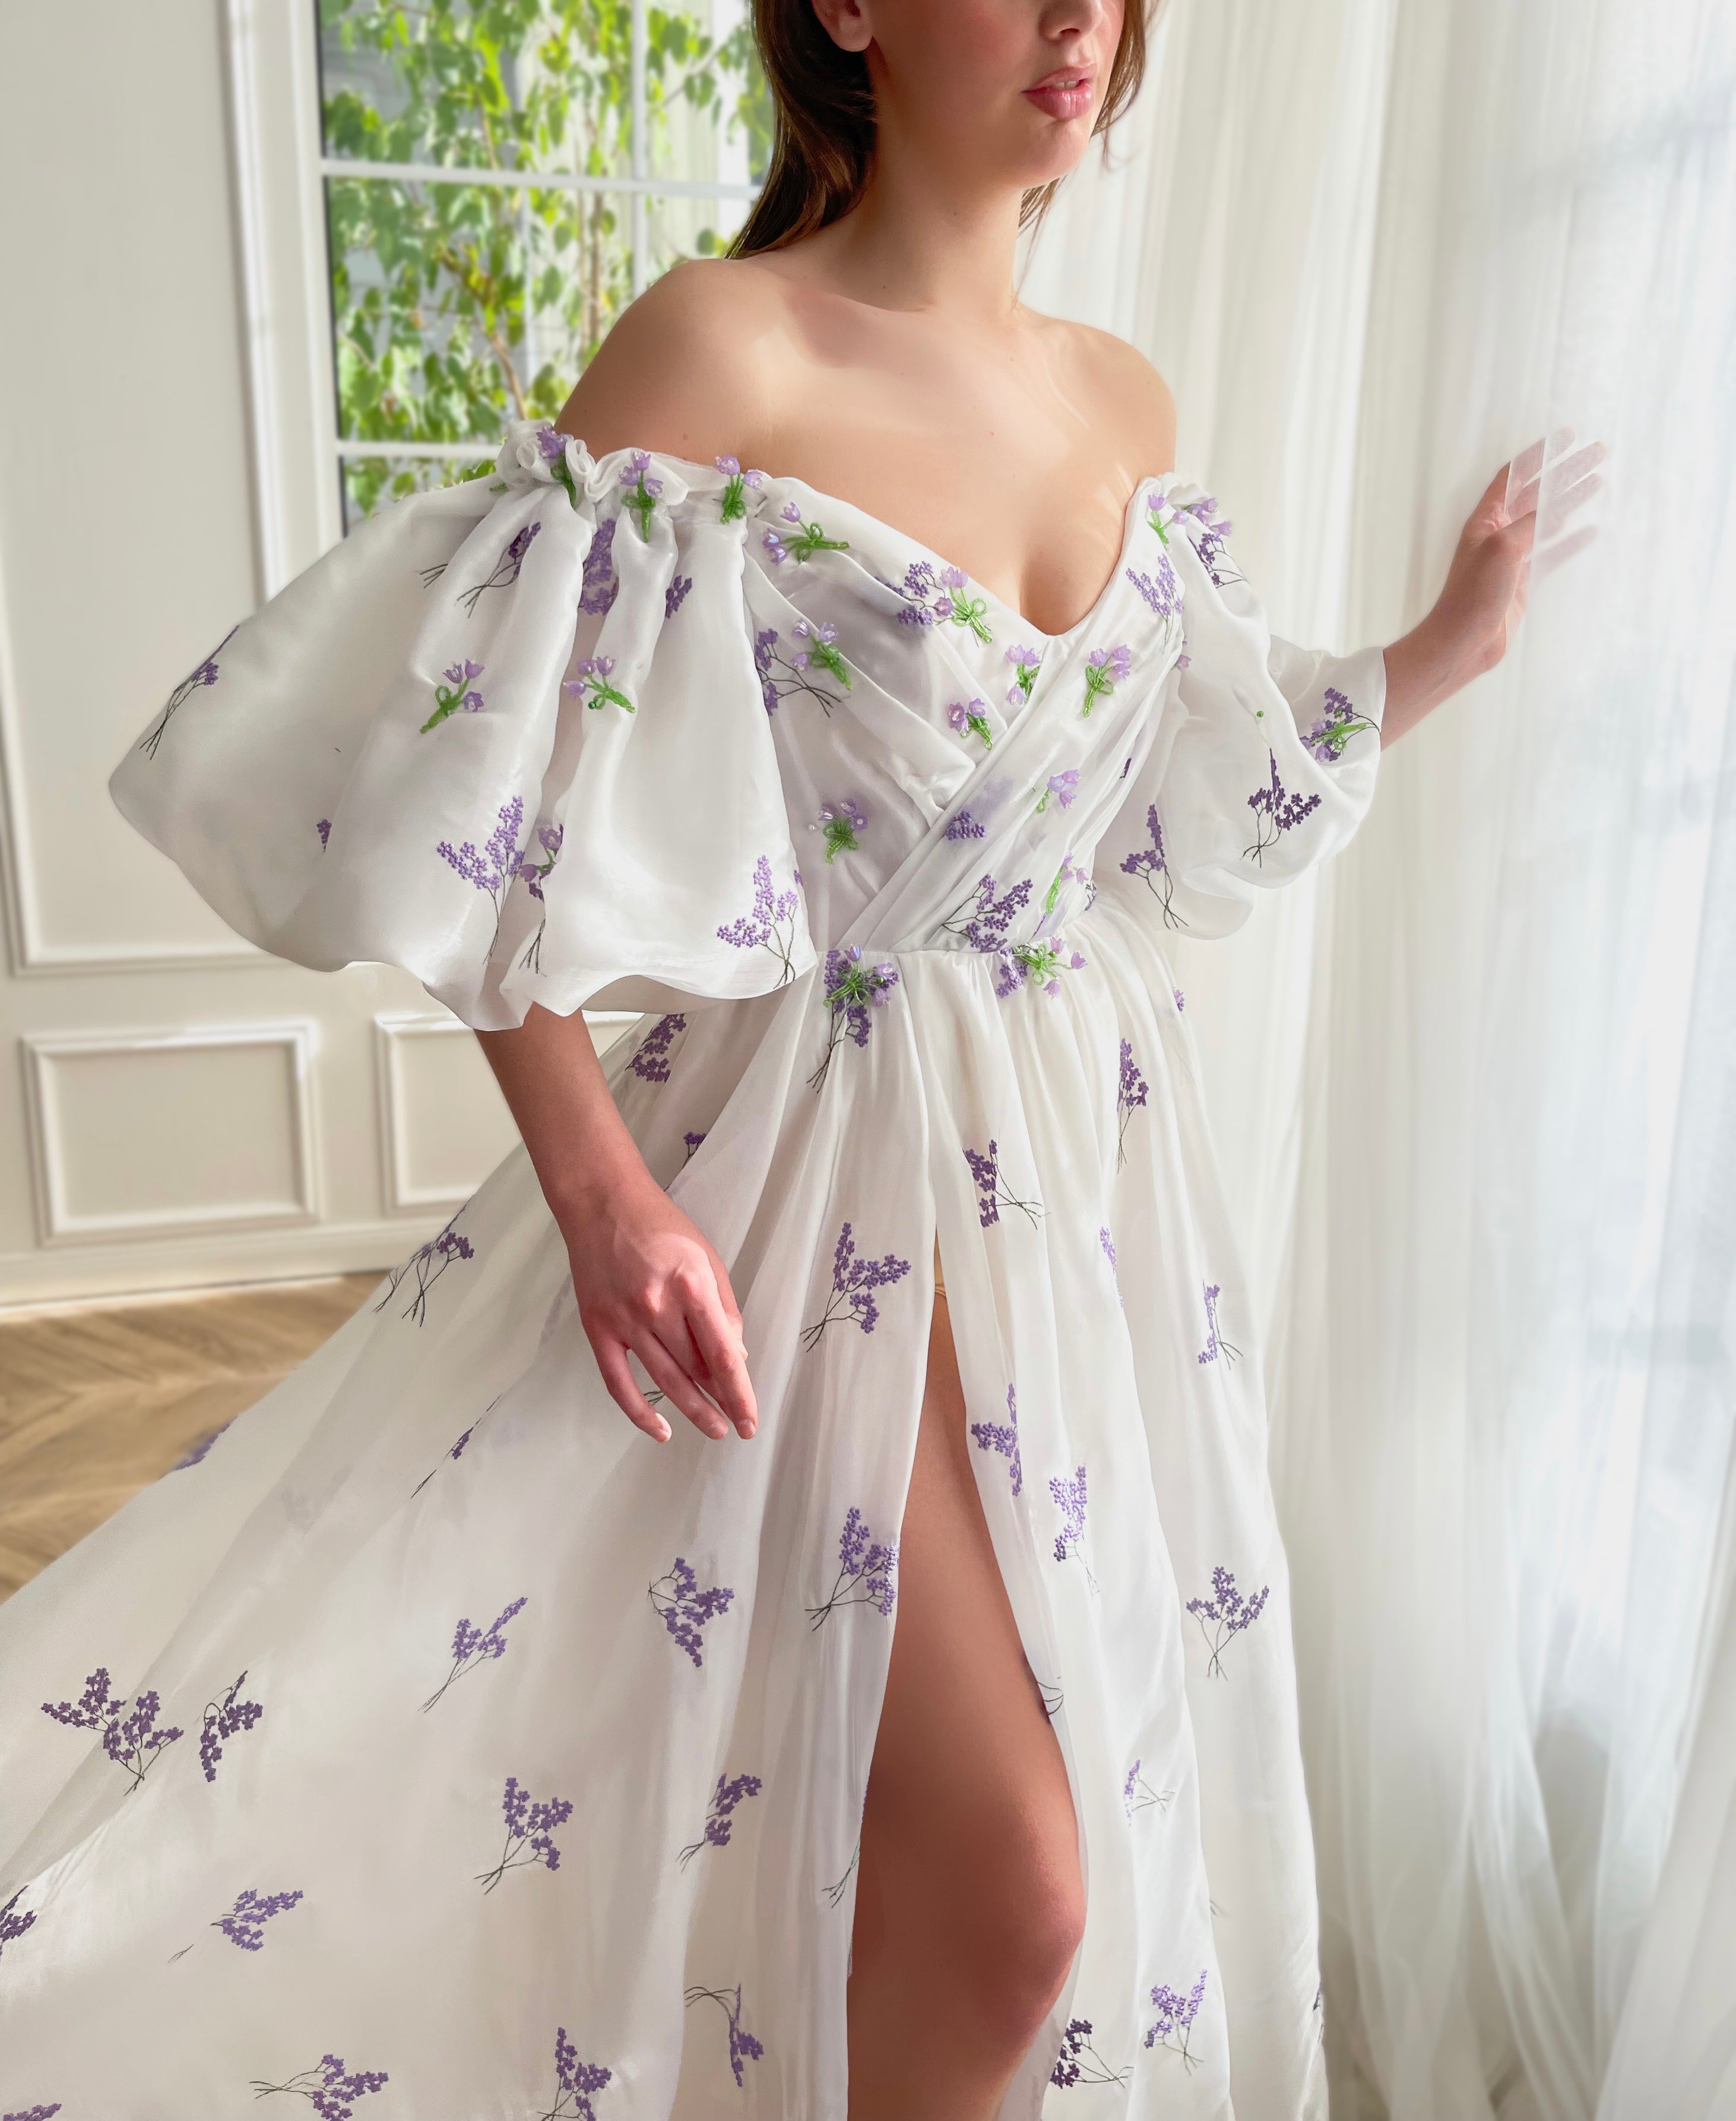 White A-Line dress with short off the shoulder sleeves and printed flowers